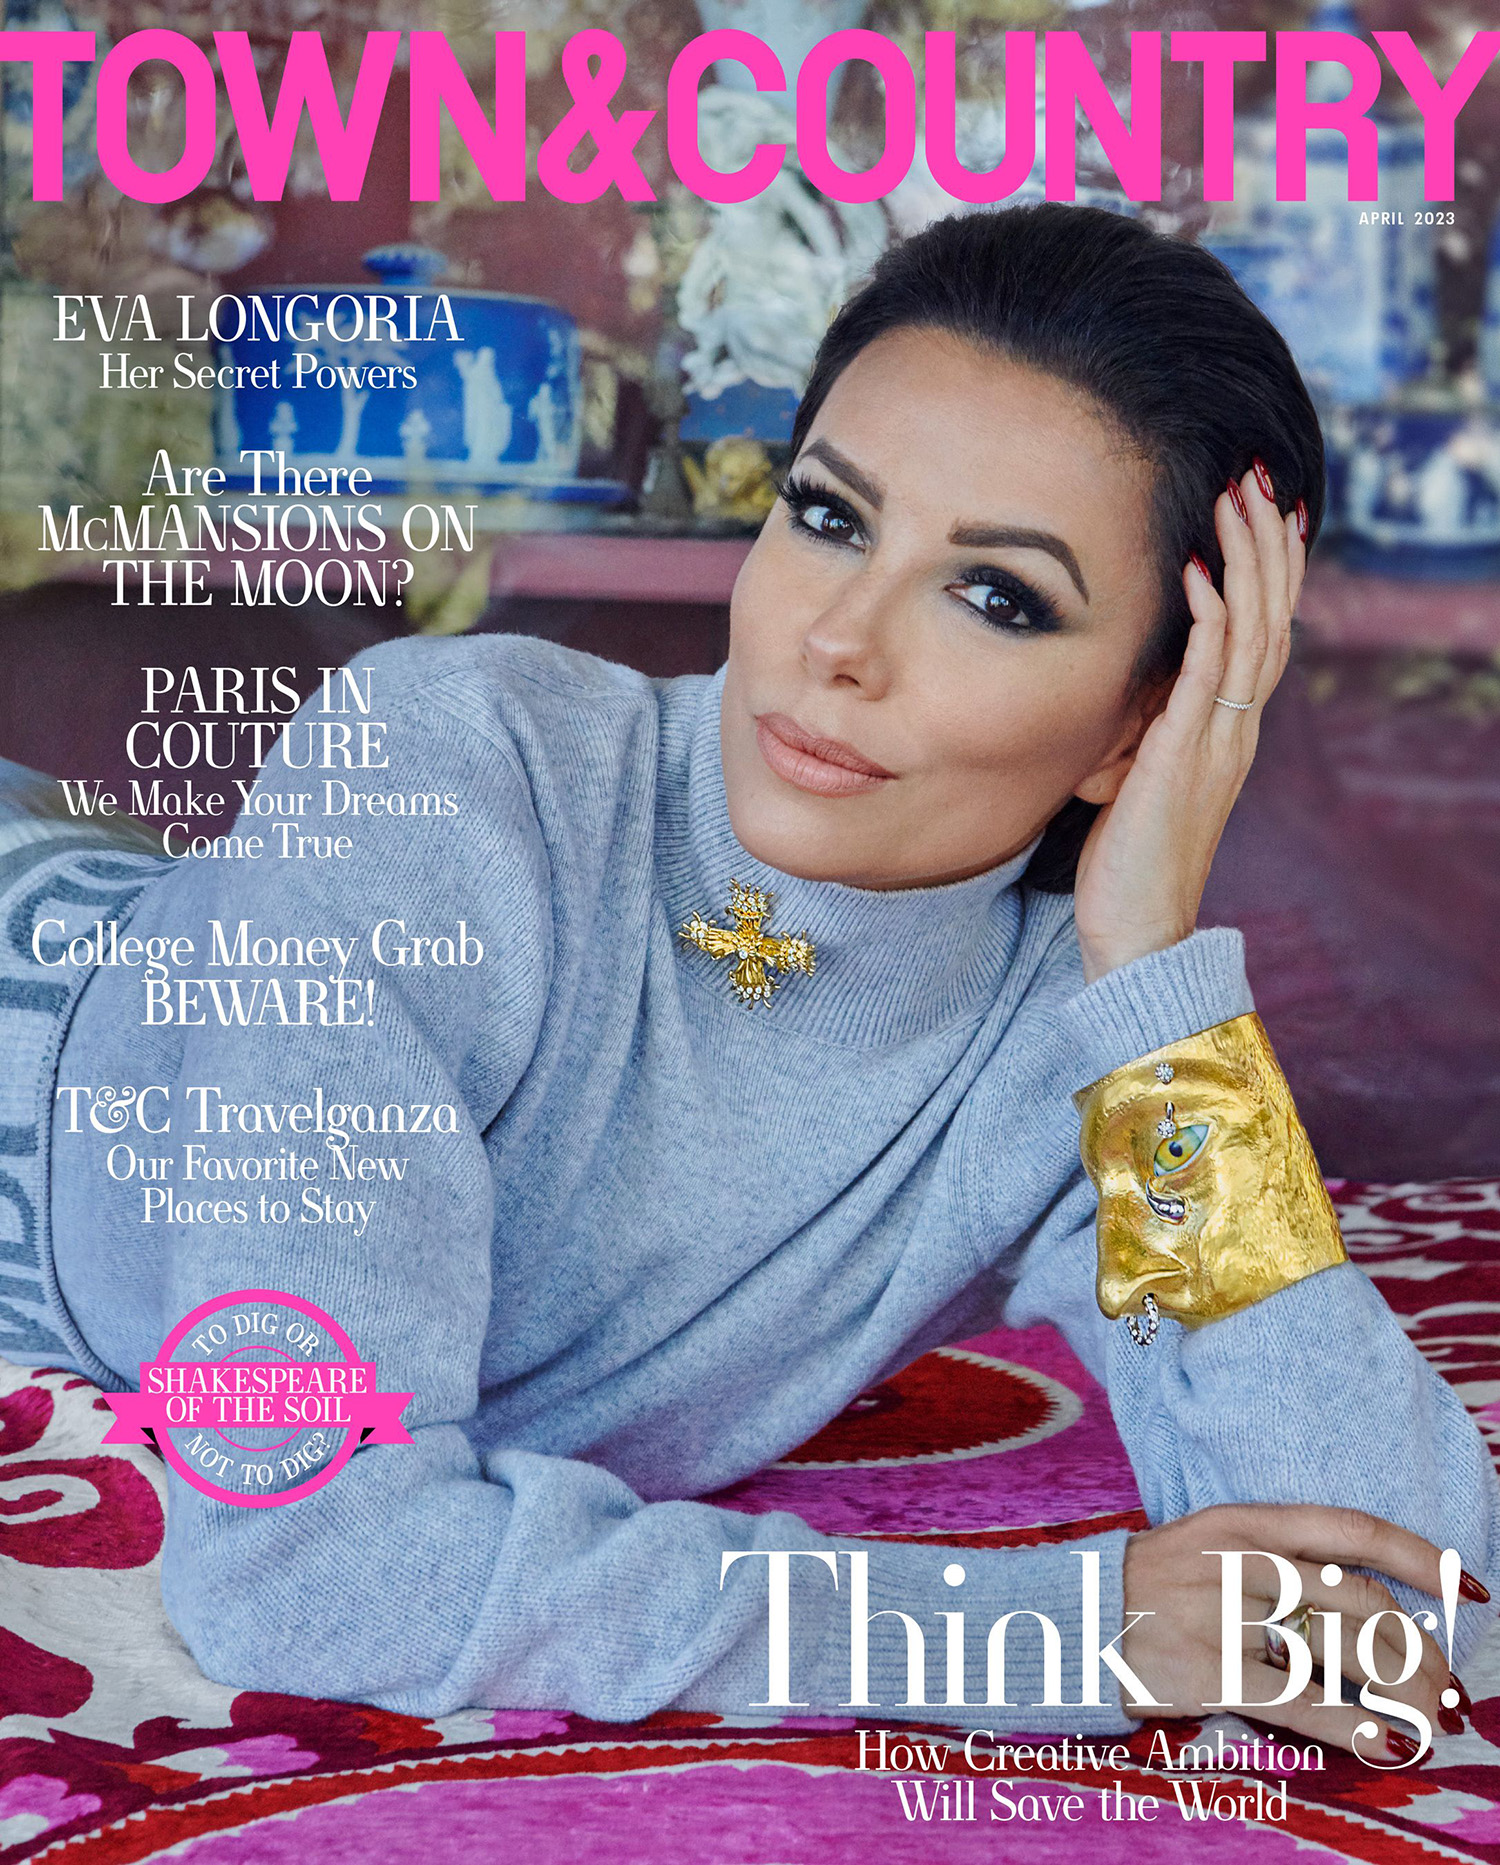 Eva Longoria covers Town & Country April 2023 by Ruven Afanador